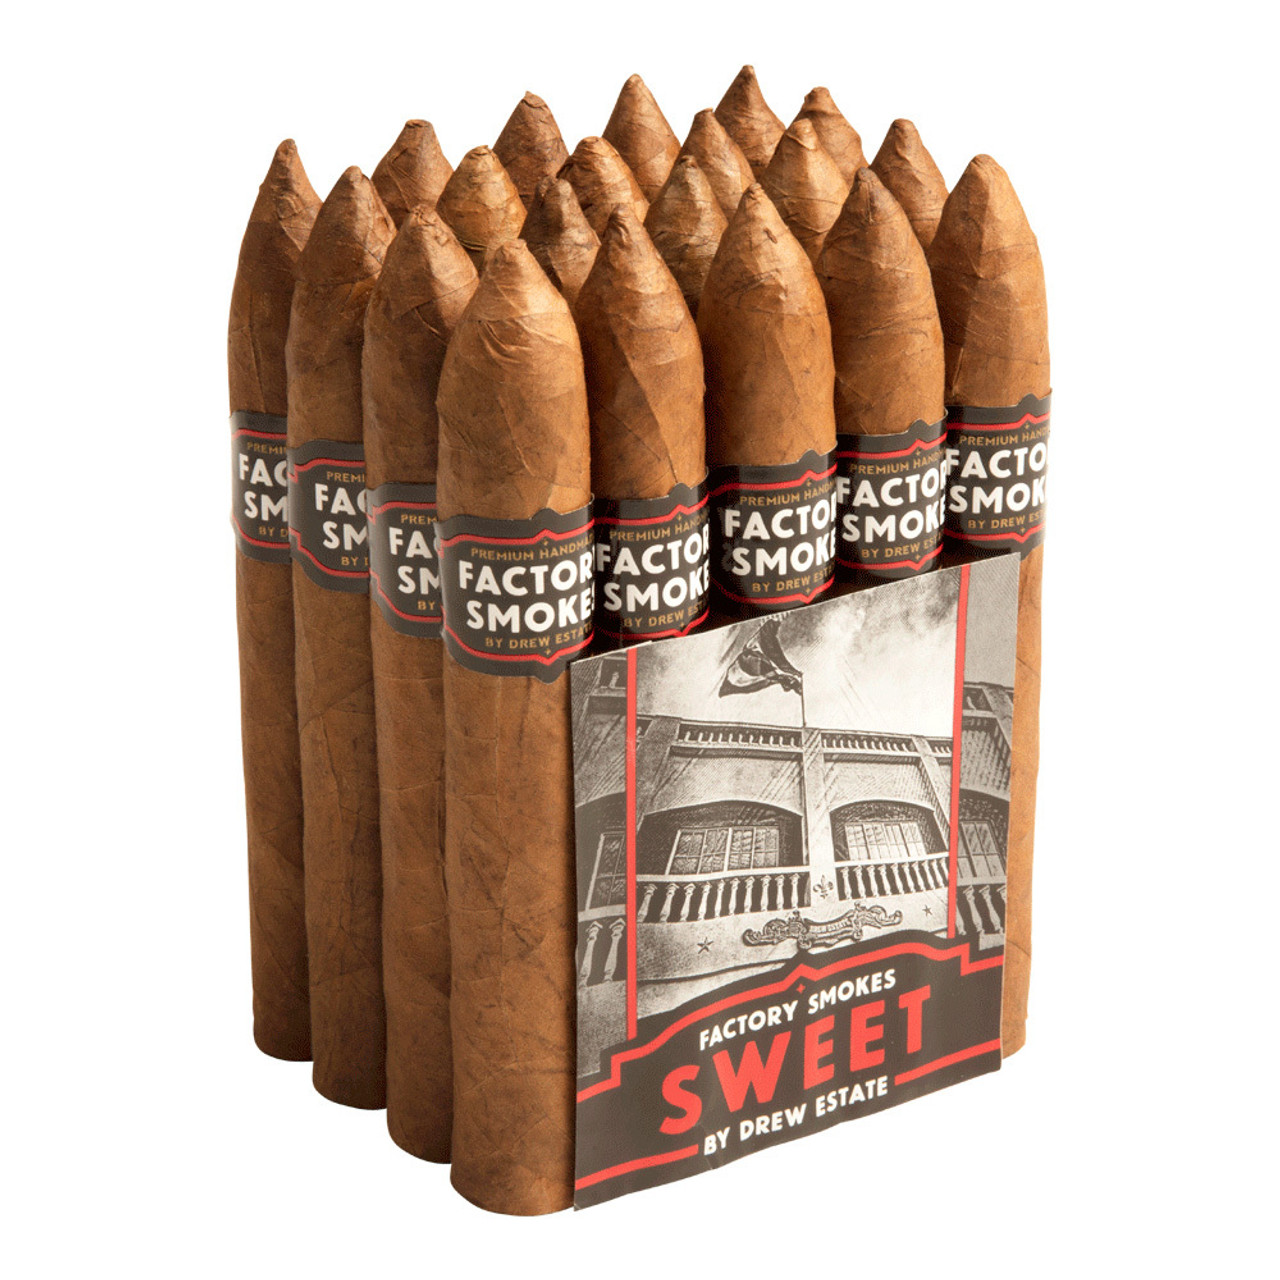 Factory Smokes by Drew Estate Belicoso Sweets Cigars - 6 x 54 (Bundle of 20) *Box